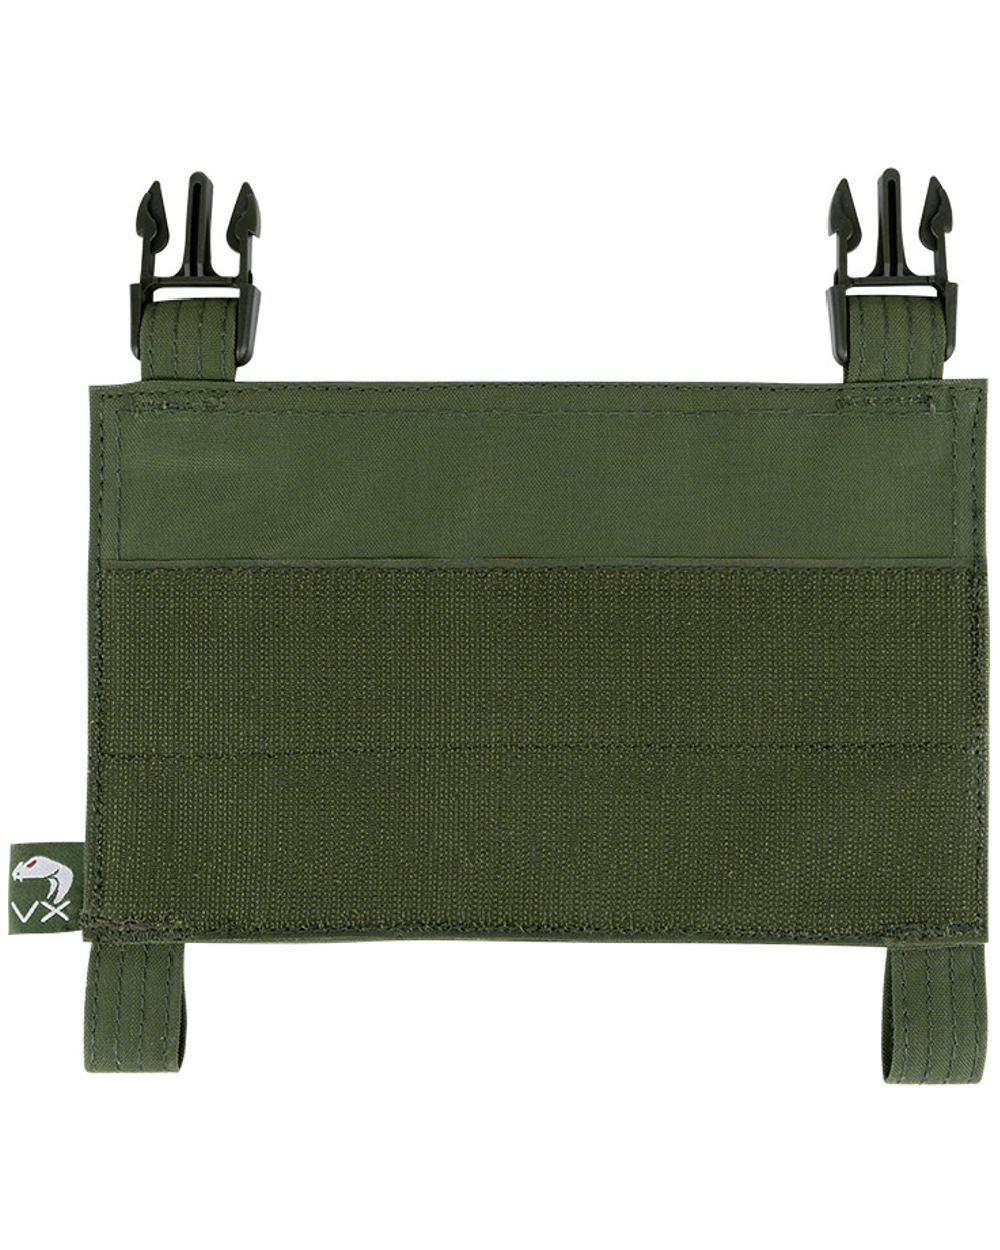 Viper VX Buckle Up Panel in Green 